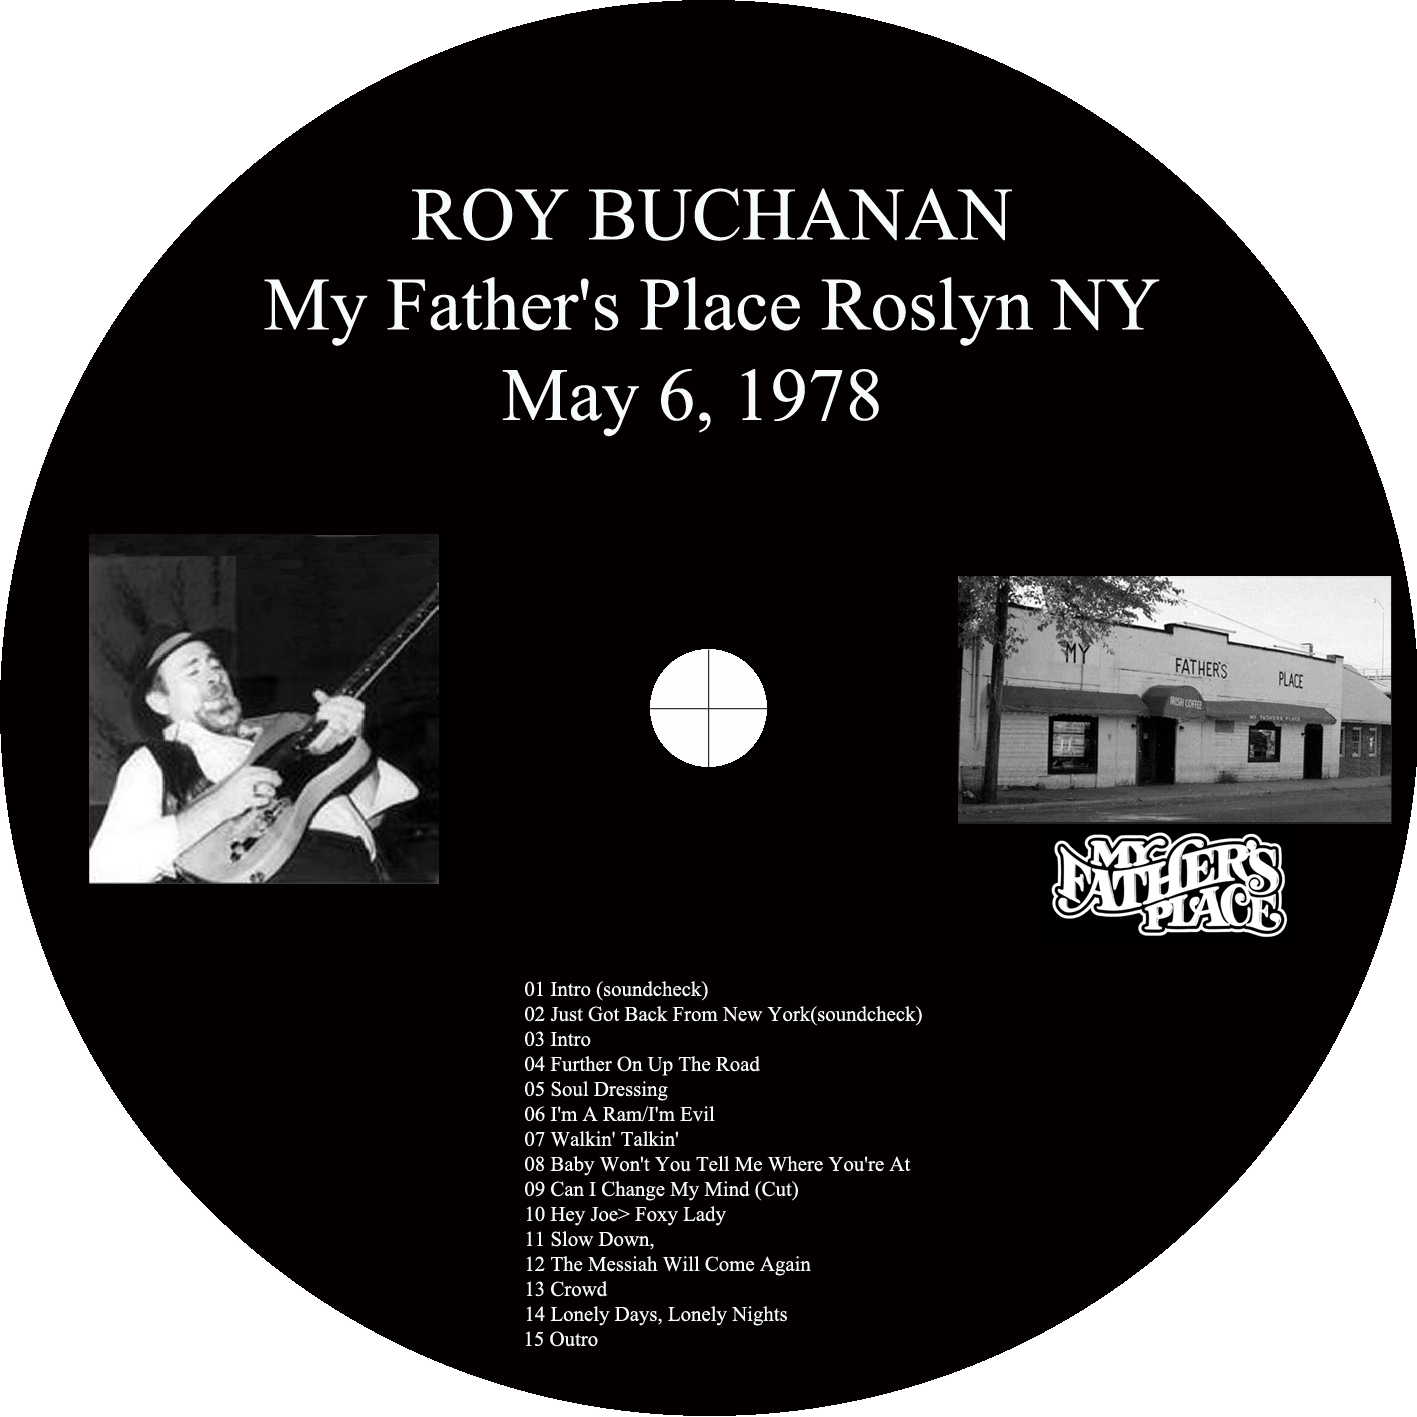 roy buchanan 1978 05 06 at my father's place label tracks sugarmegs